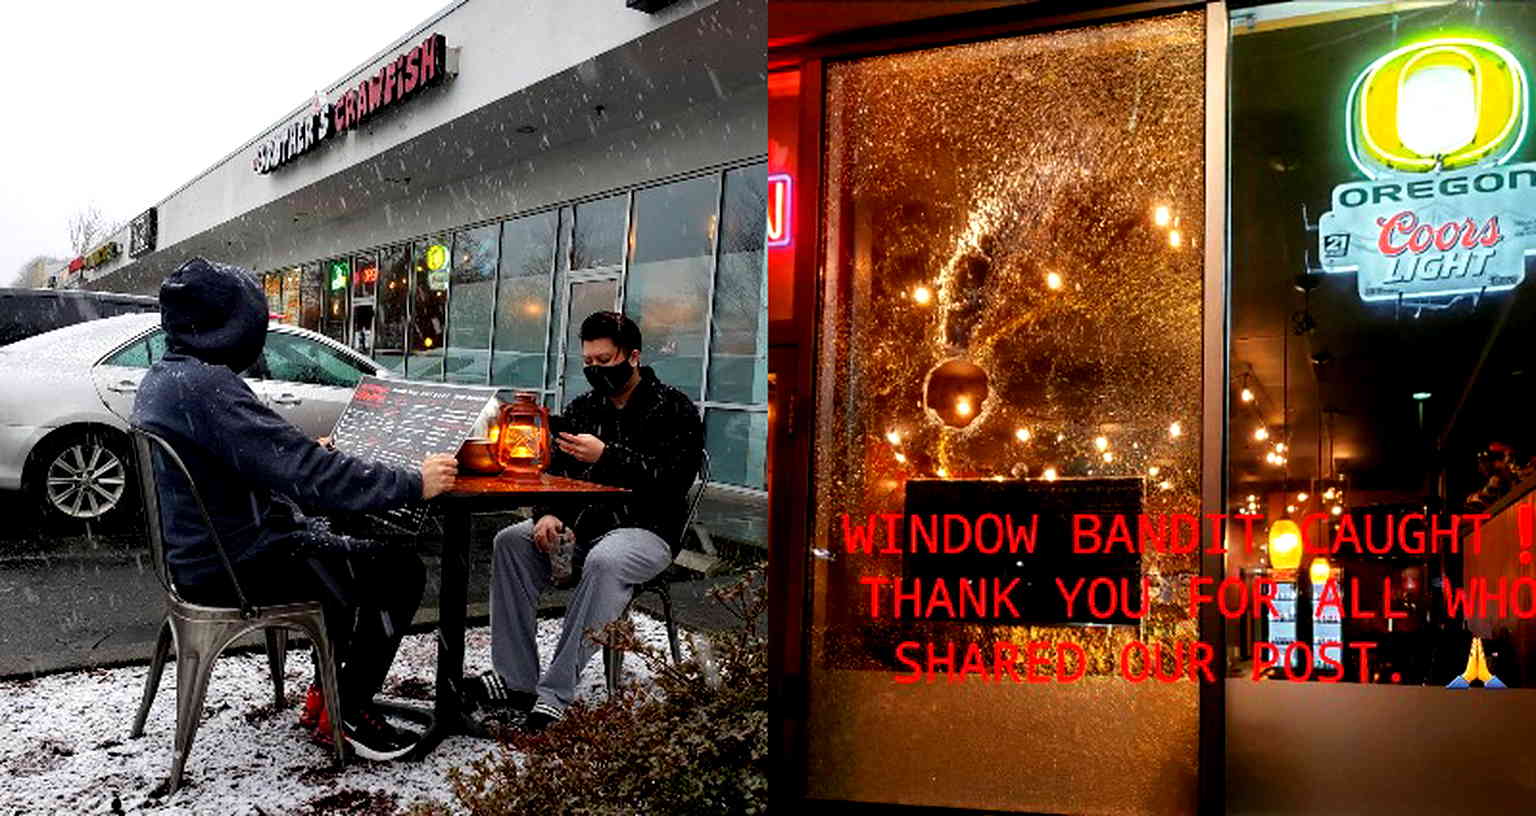 9 Asian-Owned Businesses Have Their Windows Smashed in the Last 2 Weeks in Oregon